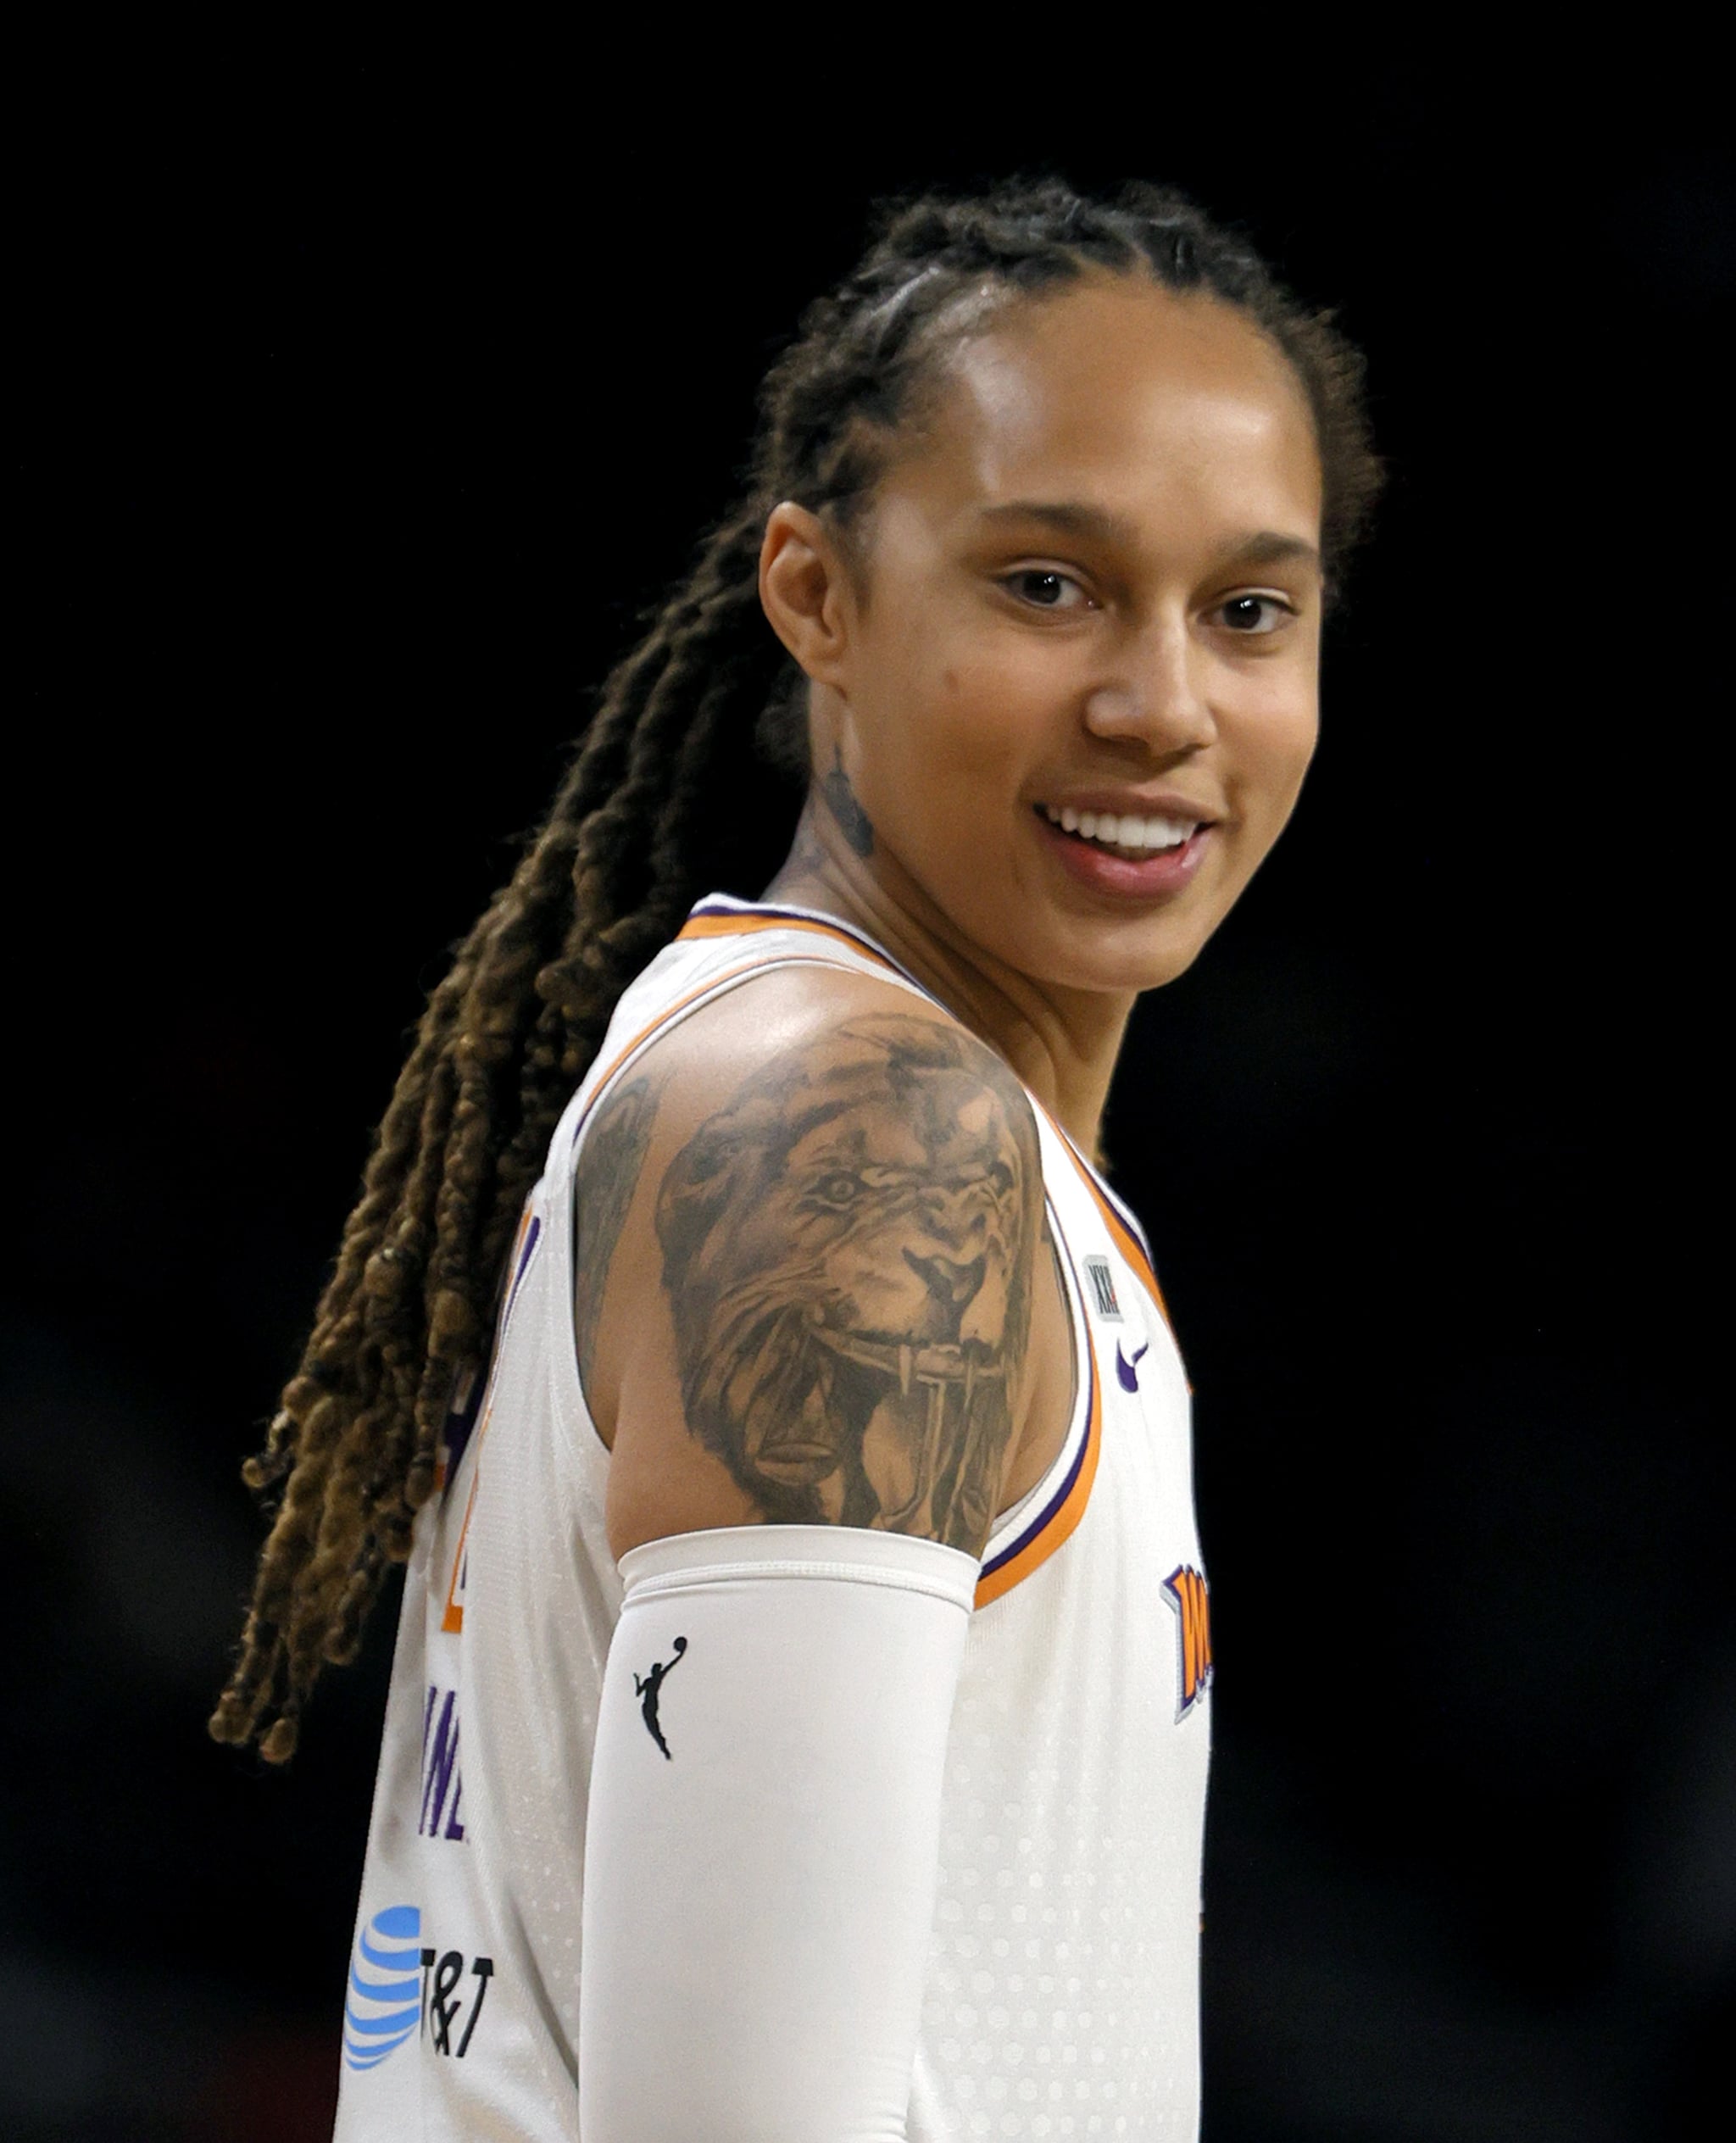 LAS VEGAS, NEVADA - SEPTEMBER 30: Brittney Griner #42 of the Phoenix Mercury smiles before game two of the 2021 WNBA Playoffs Semifinals against the Las Vegas Aces at Michelob ULTRA Arena on September 30, 2021 in Las Vegas, Nevada.  The Mercury defeated the Aces 117-91.  NOTICE TO USER: User expressly acknowledges and agrees that by downloading and/or using this photograph, the user agrees to the terms of the Getty Images License Agreement.  (Photo by Ethan Miller/Getty Images)